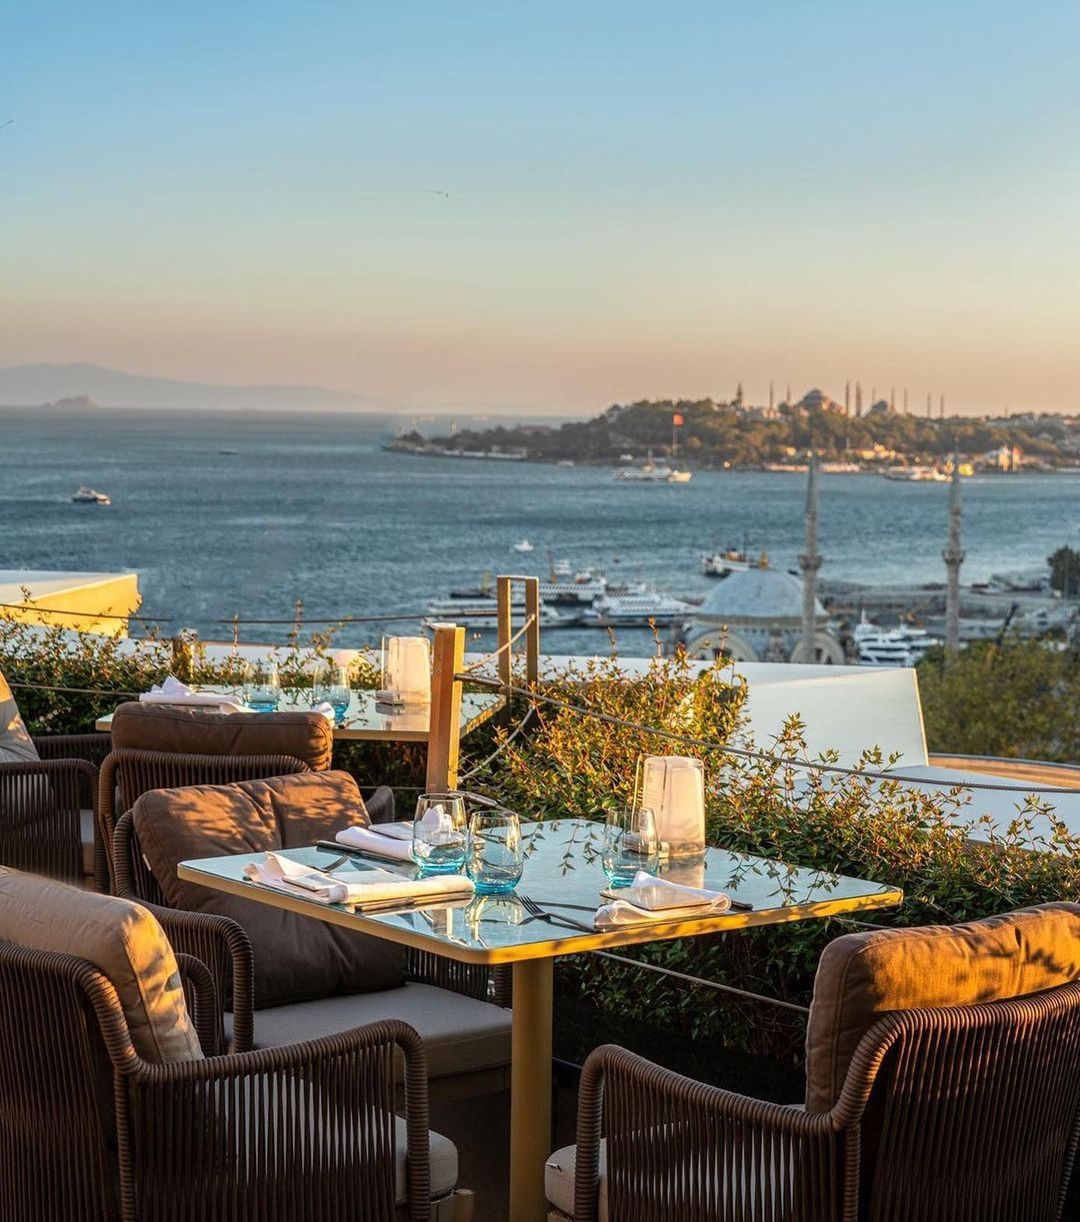 16 ROOF at Swissotel Istanbul - Best Restaurants with Bosphorus View